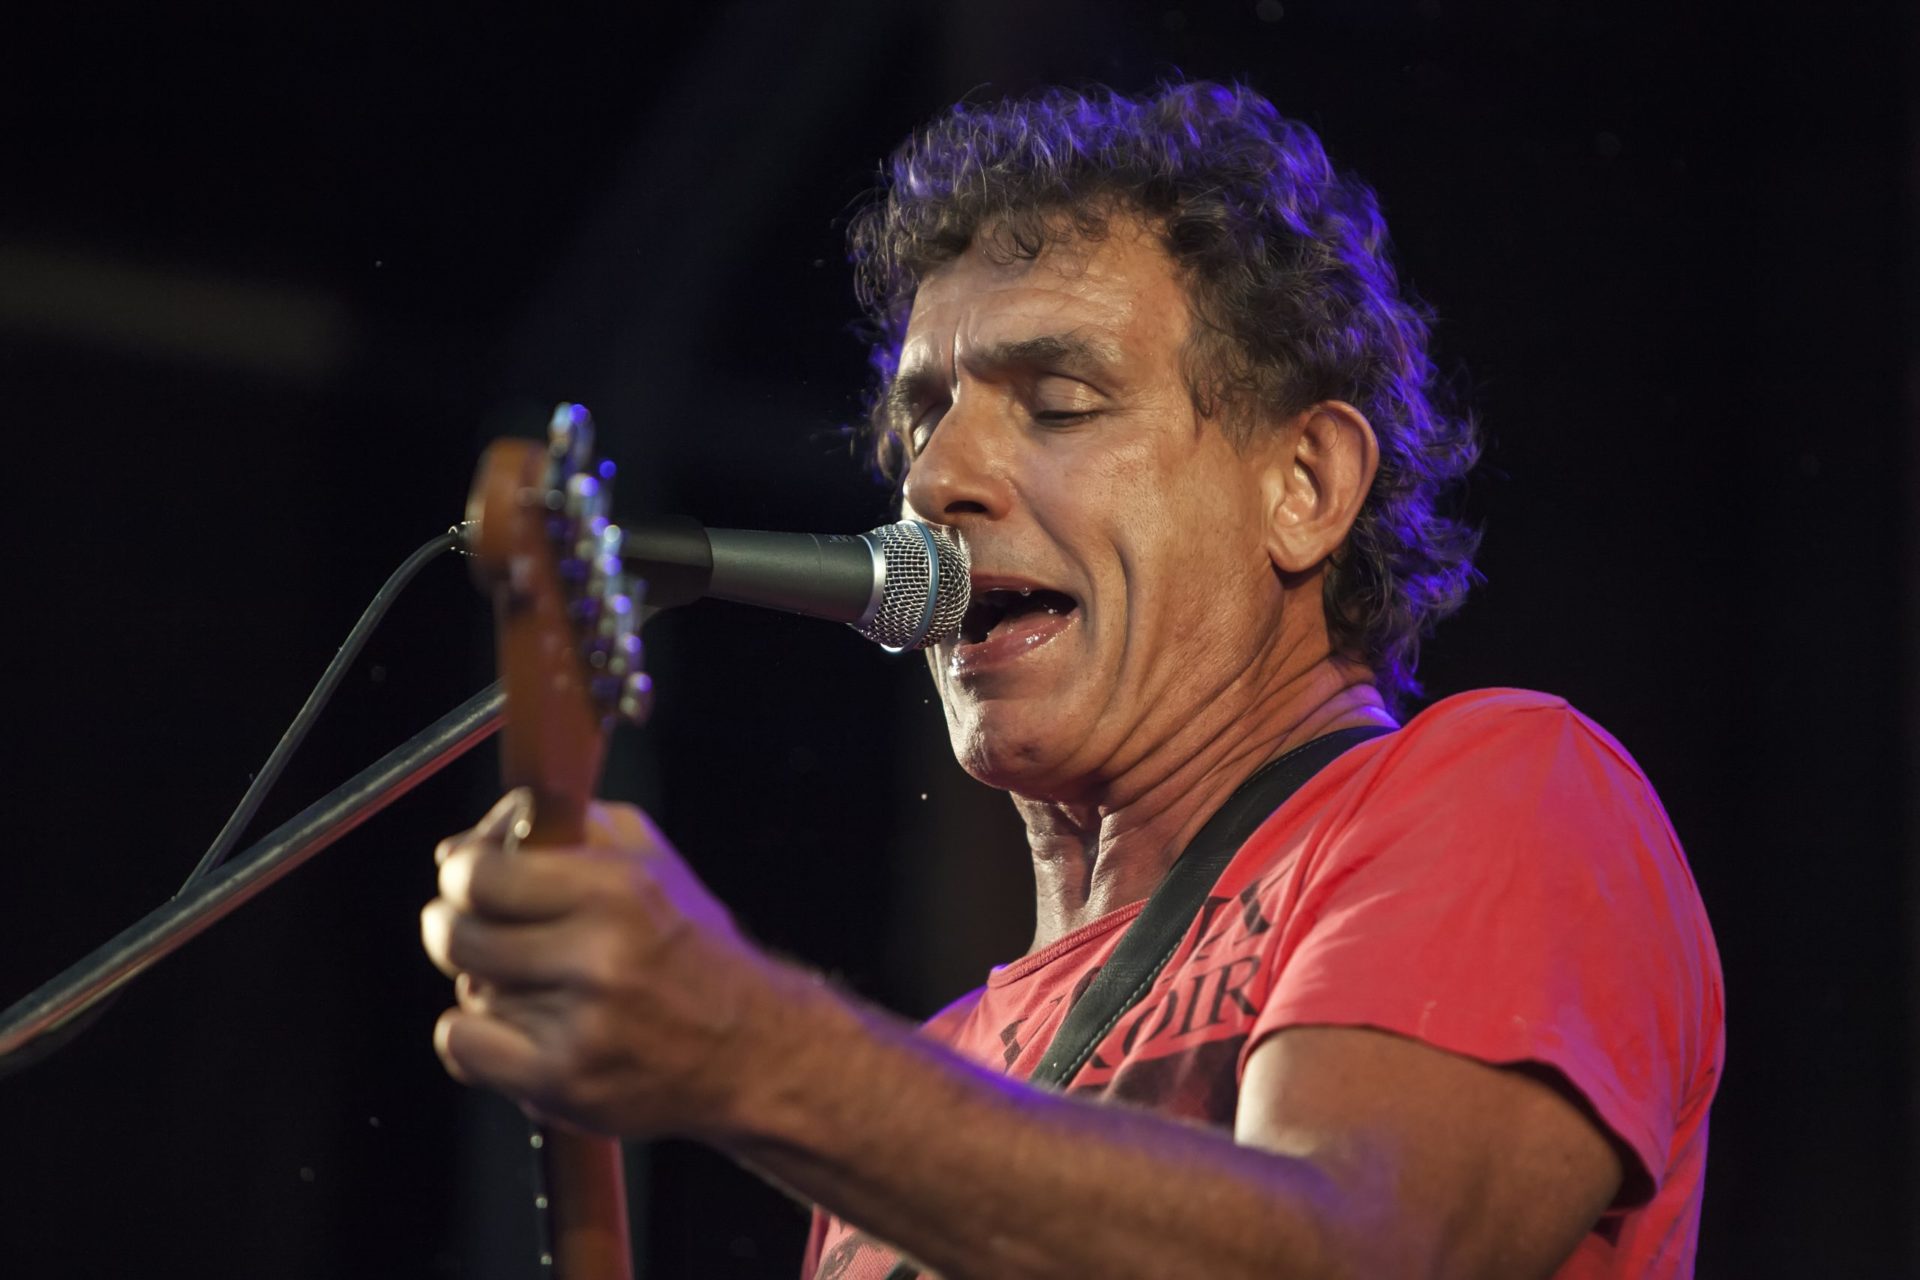 Ian Moss @ Sounds By The River, January ’13